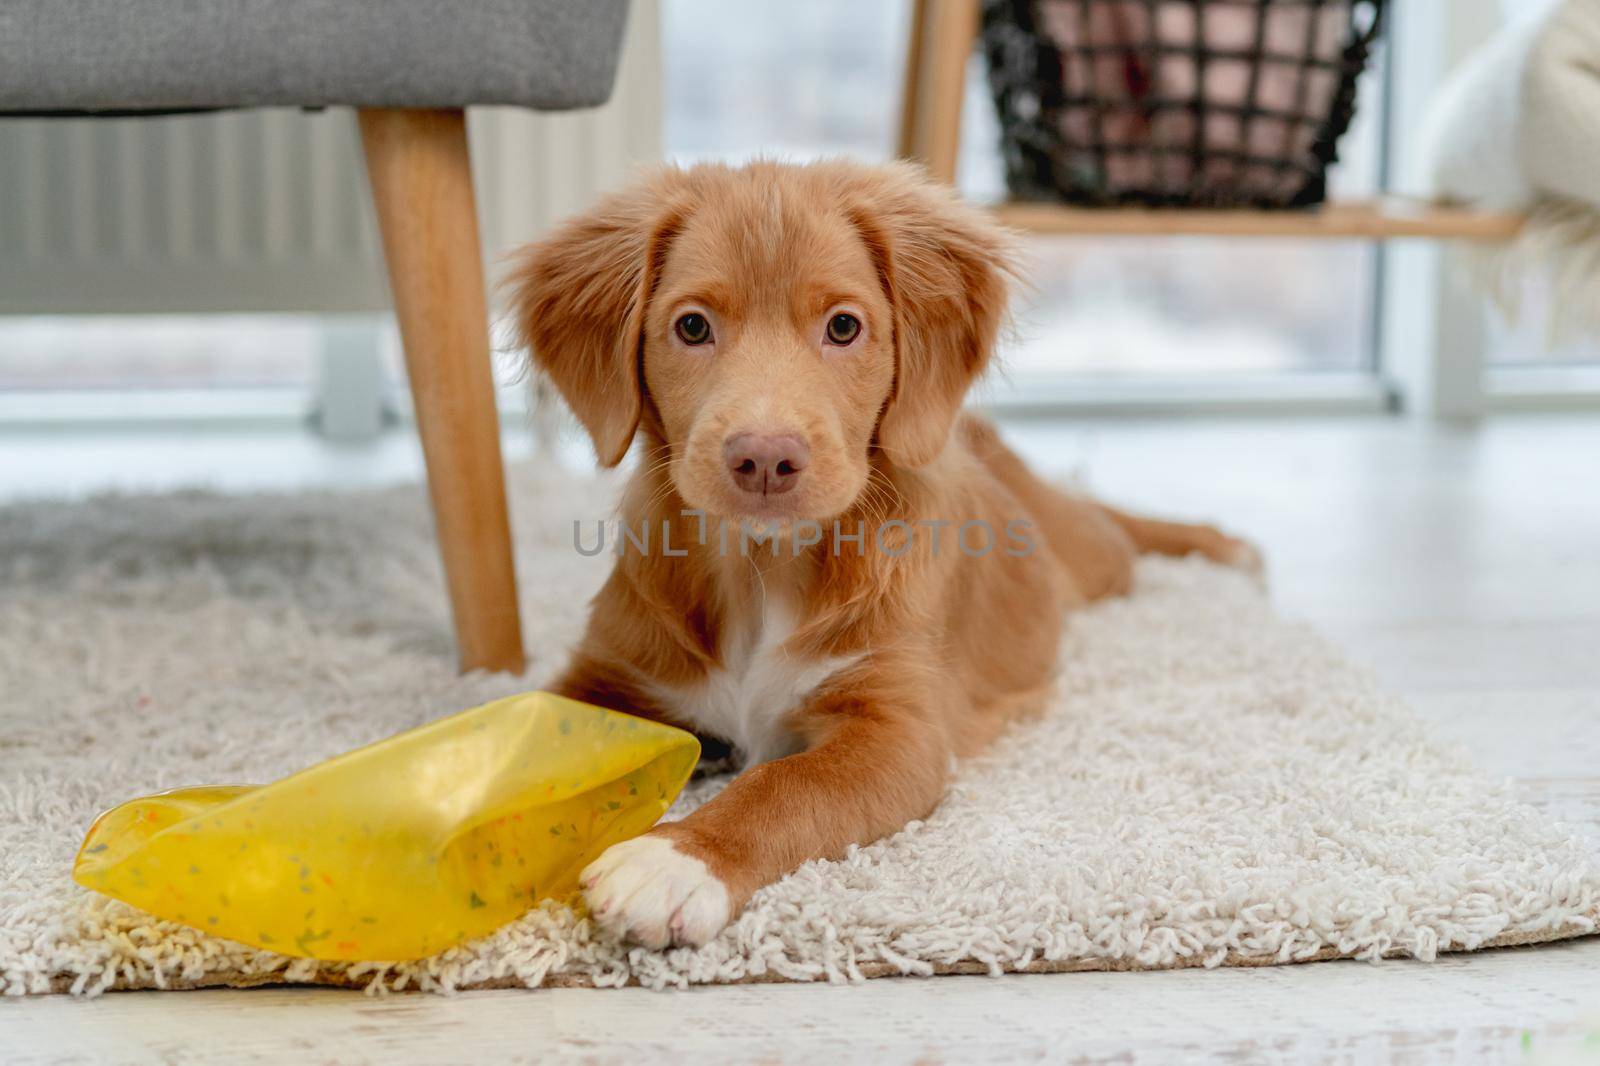 Toller puppy having fun with dog toys on carpet at home